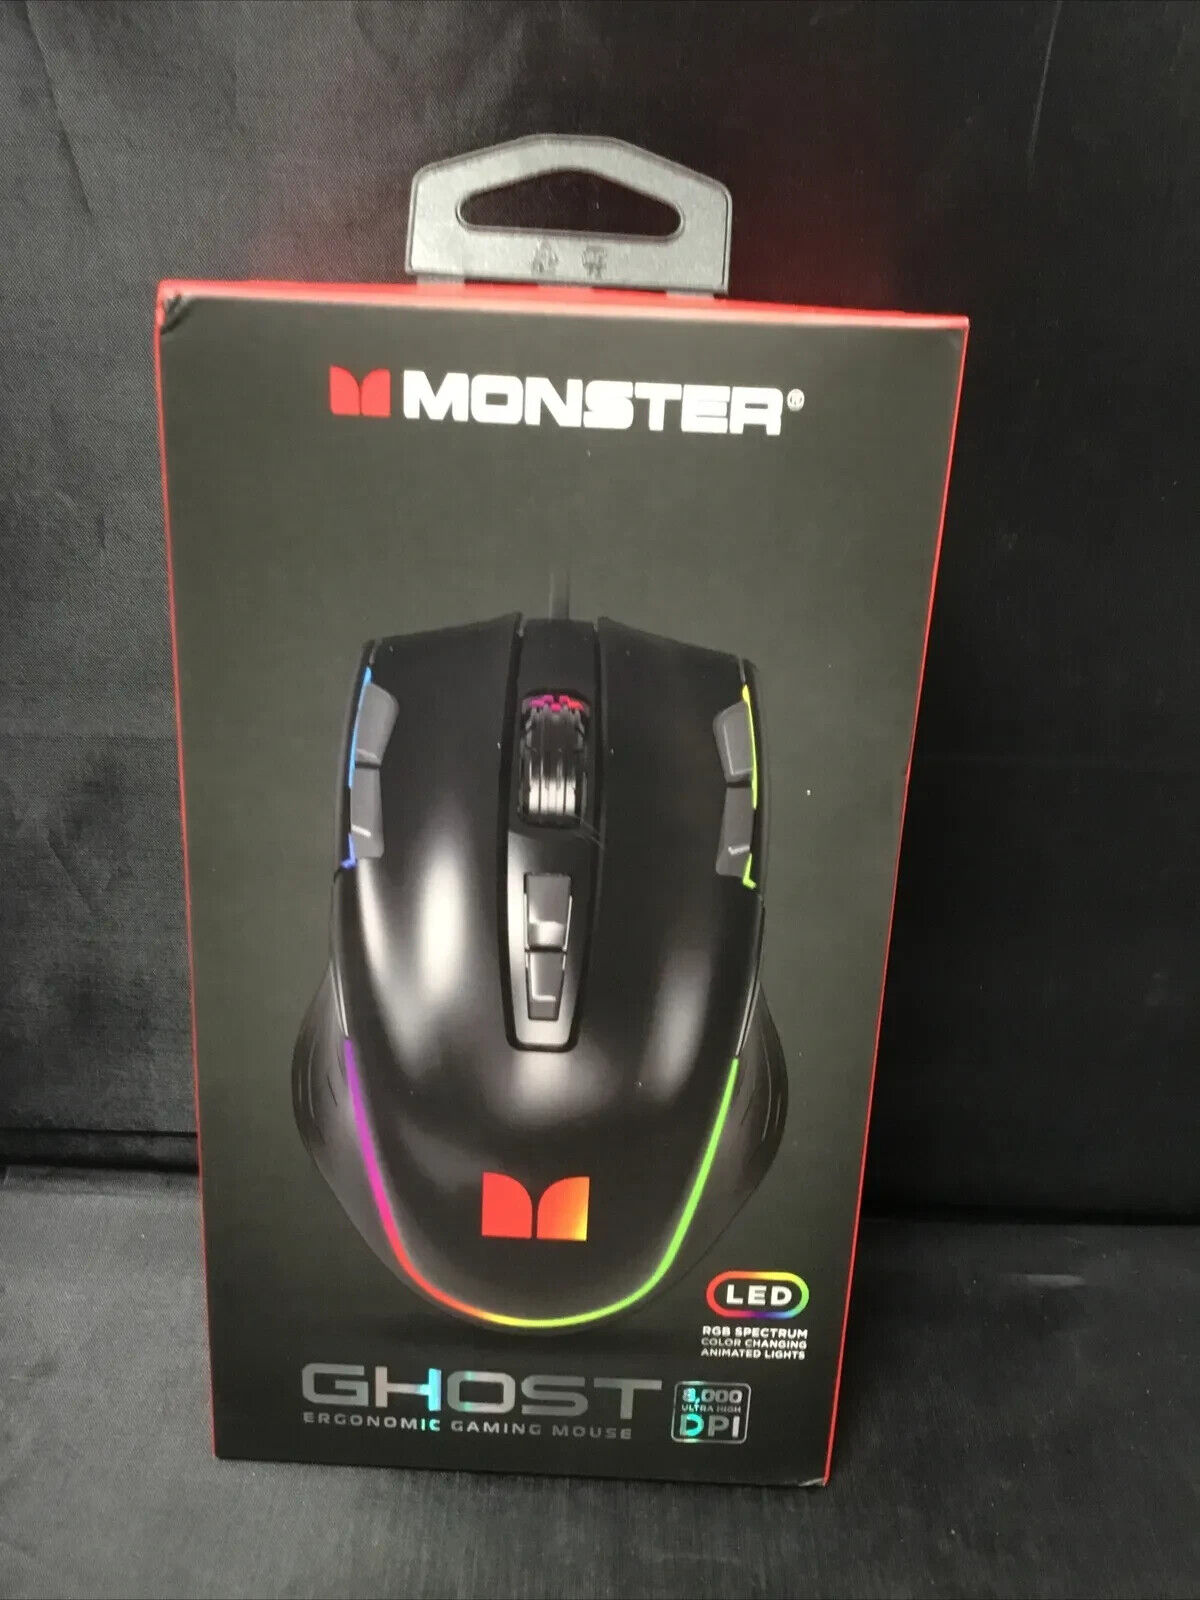 Authentic Monster Ghost Ergonomic Wired Gaming Mouse (2MNGM0306BOL2)